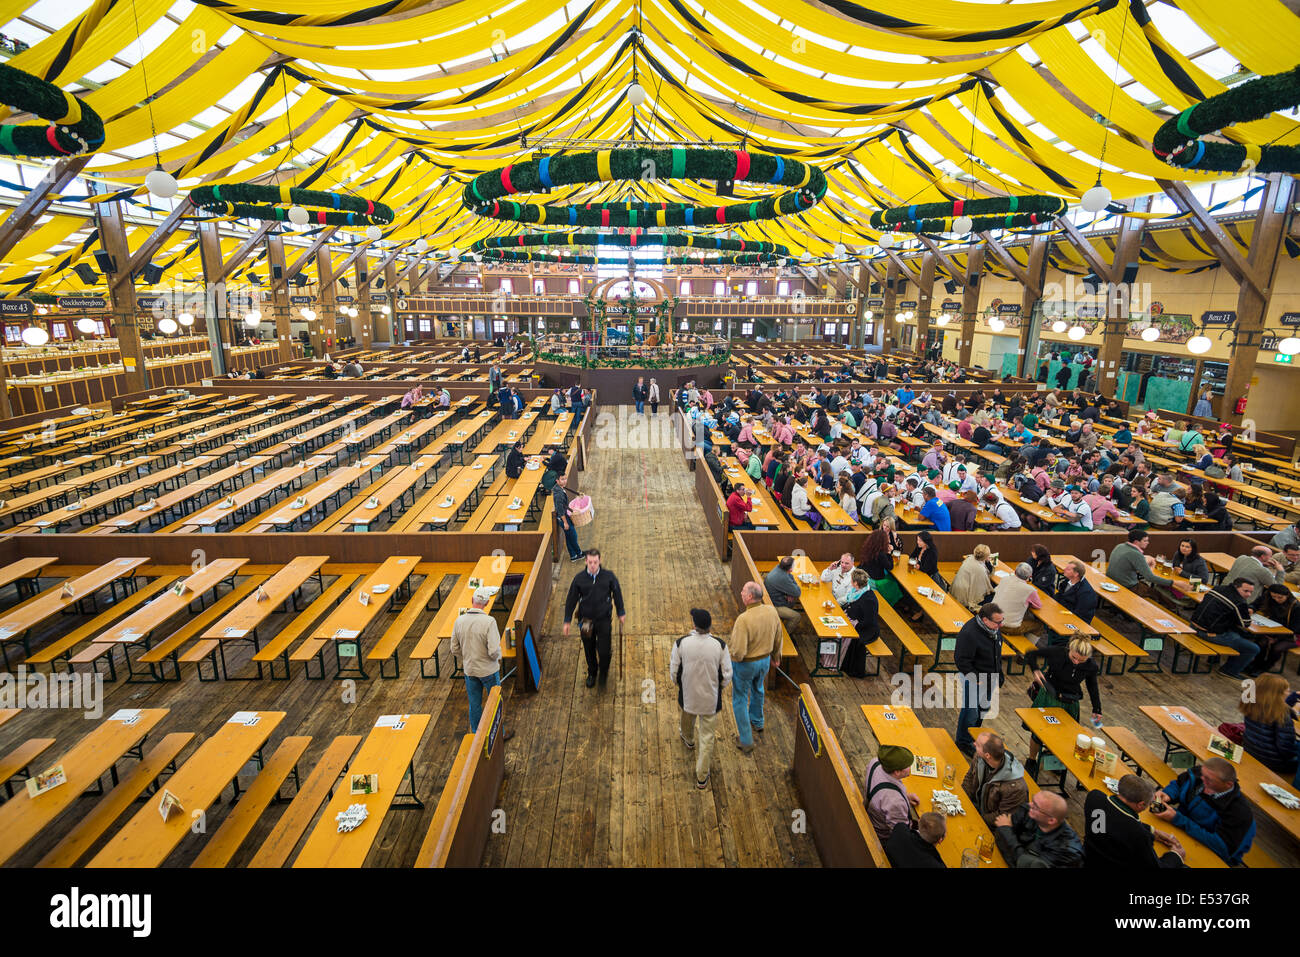 The Paulaner Beer Tent on the Theresienwiese Oktoberfest fair grounds. Stock Photo